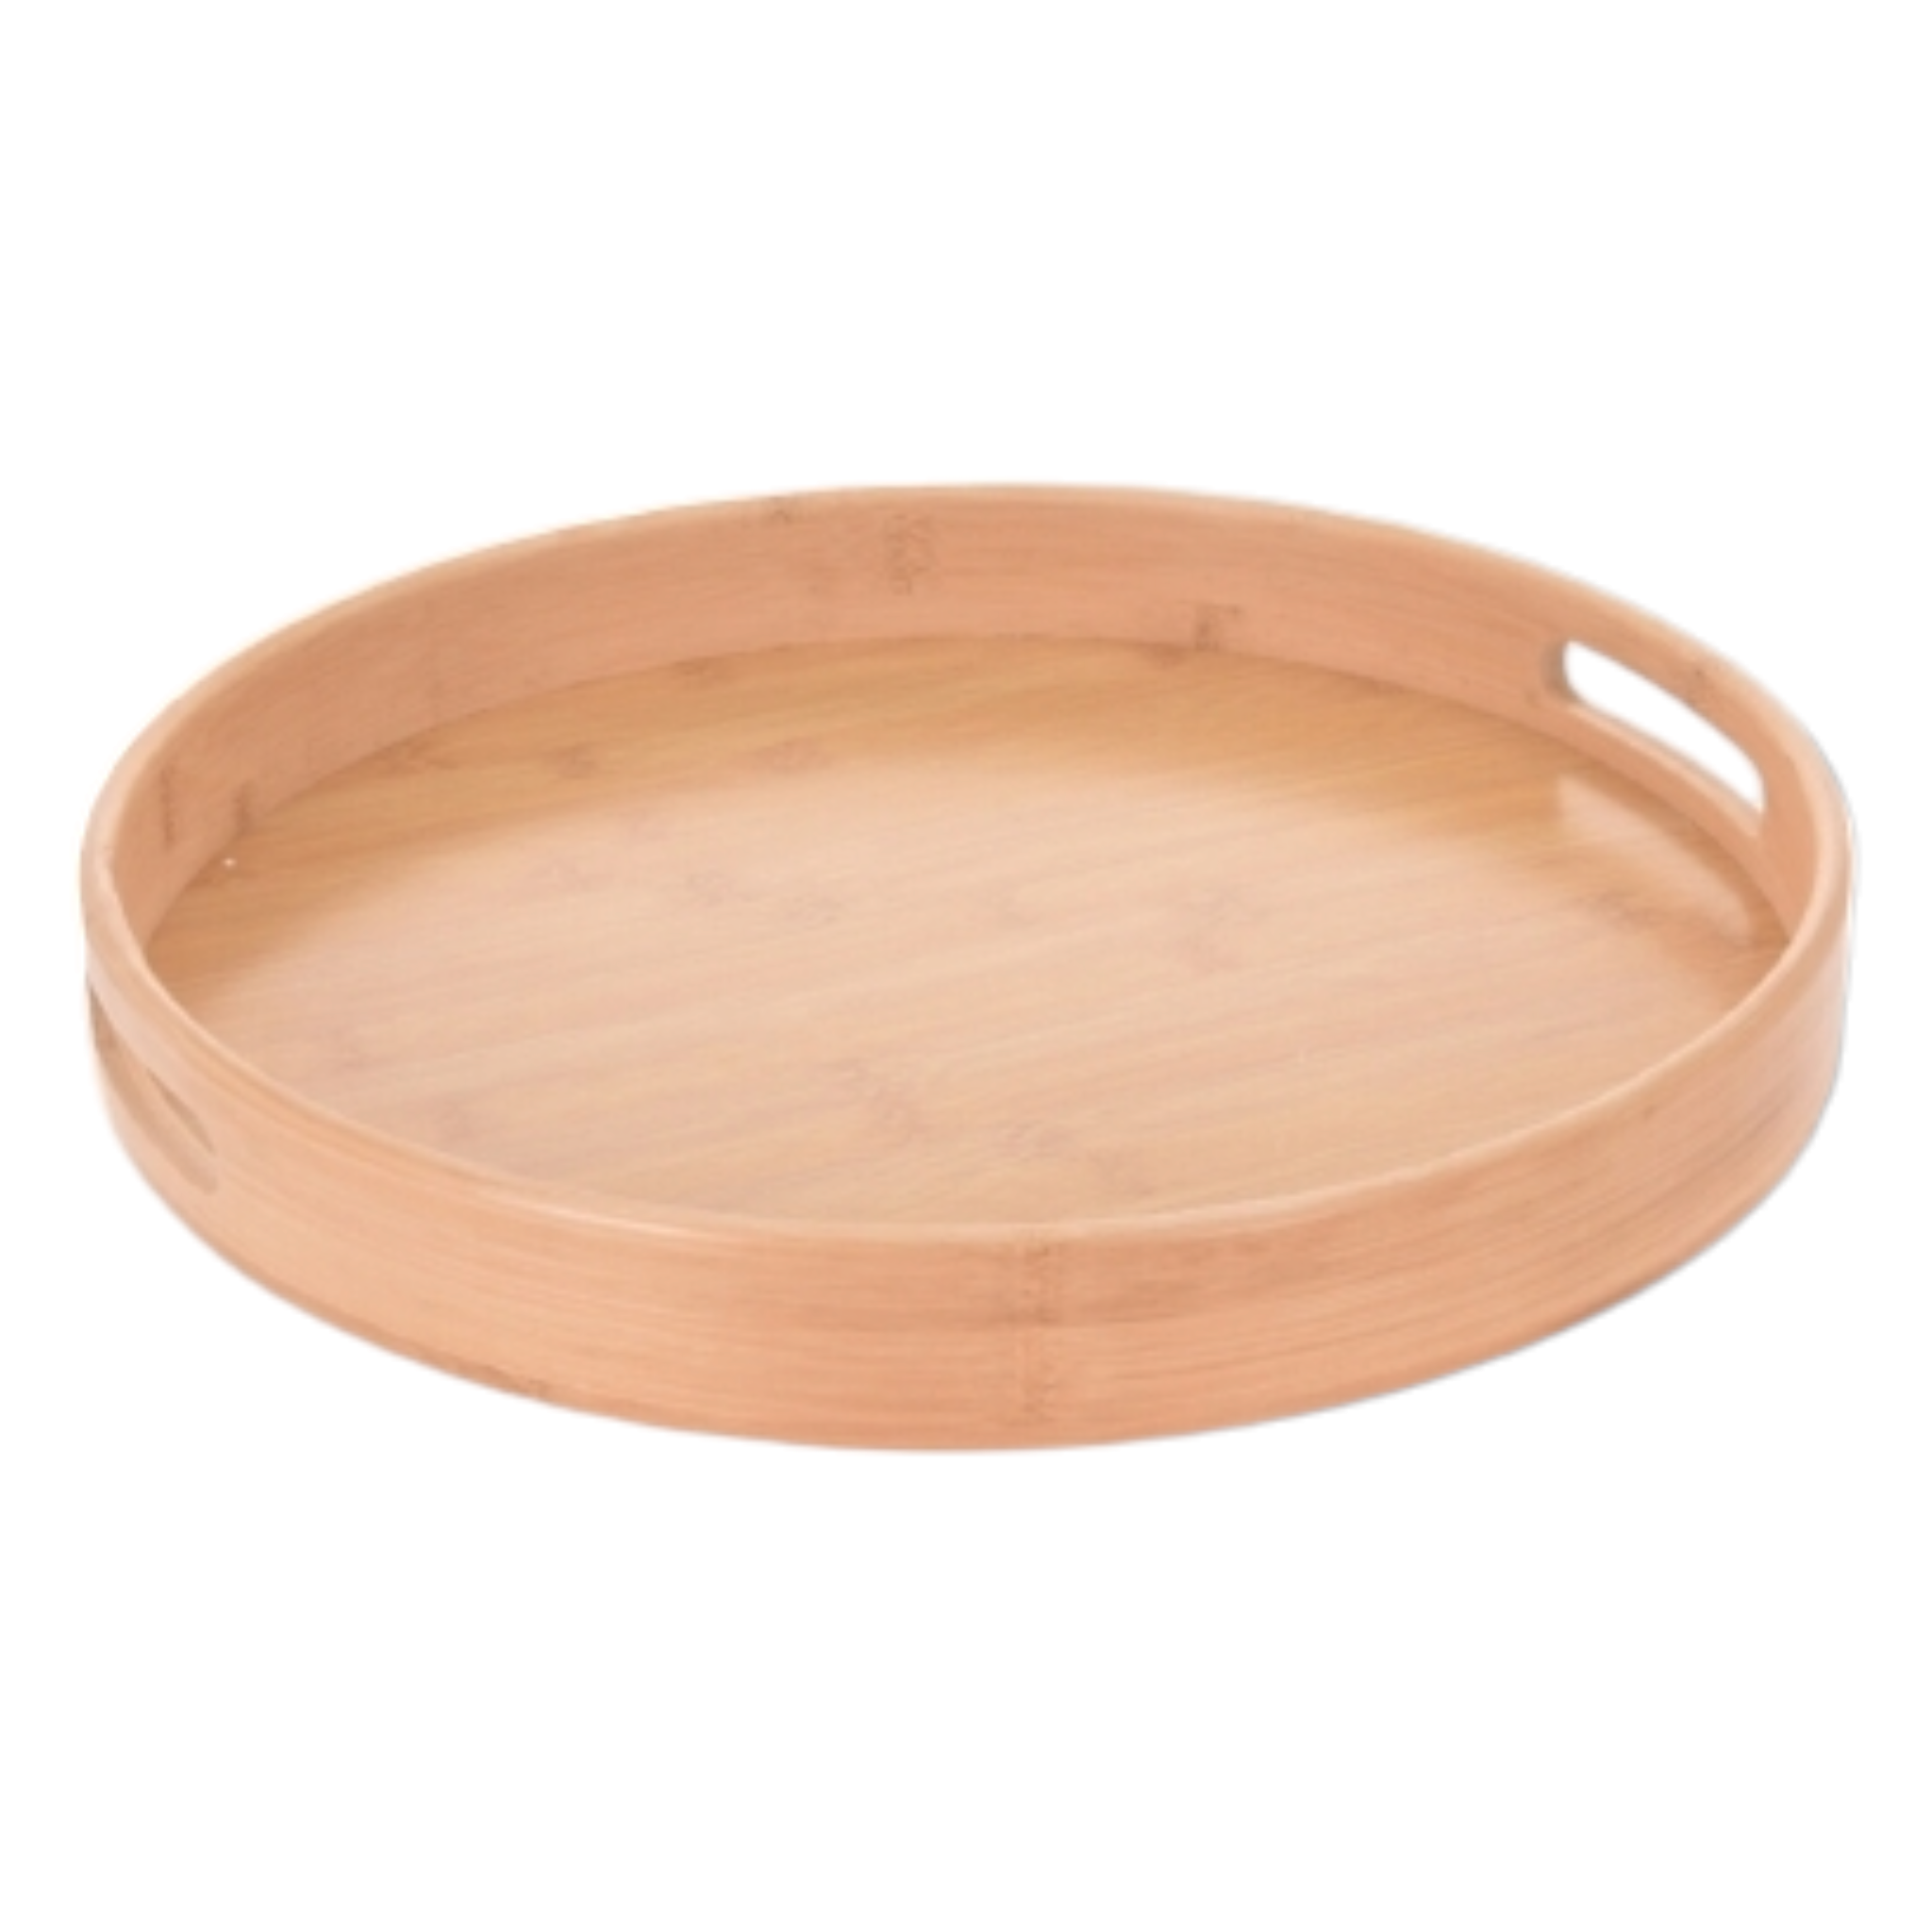 Excellent Housewares Bamboo Serving Tray Round with Grip Handle 40x5cm 21071